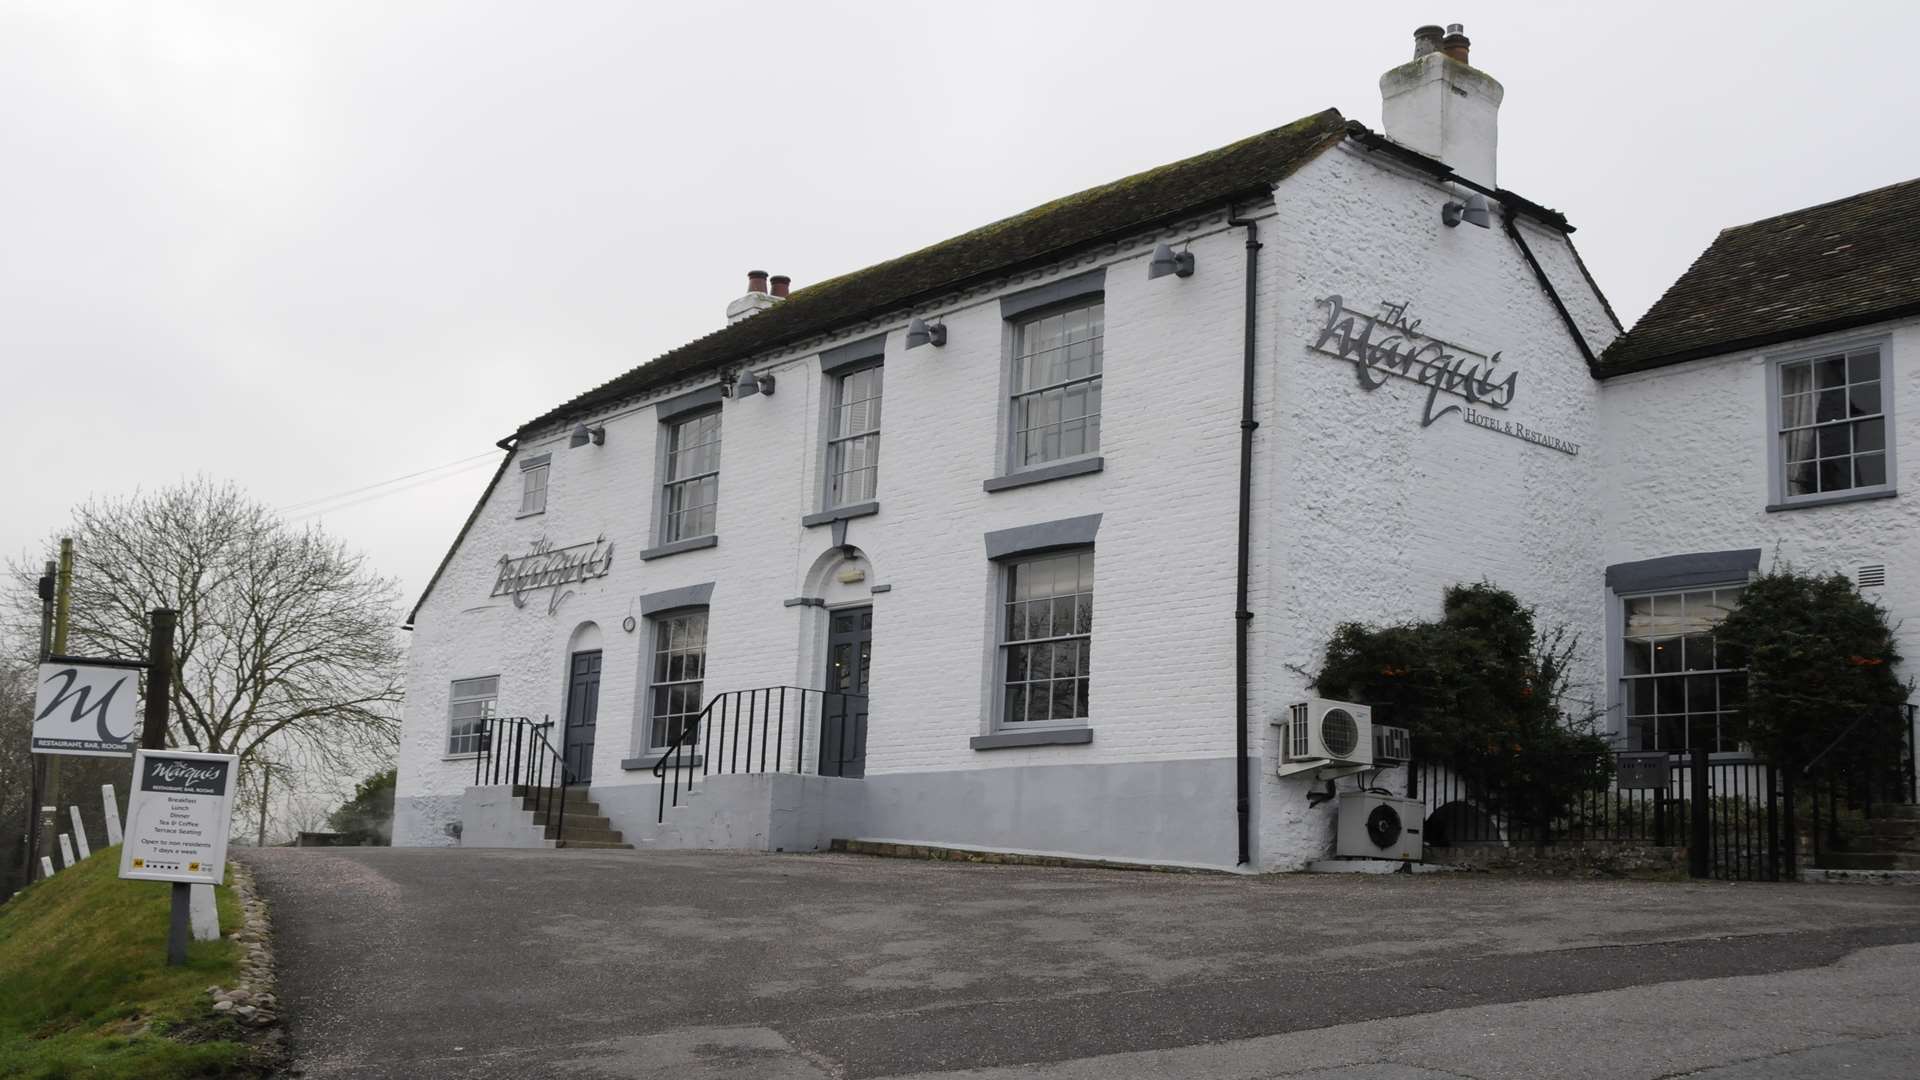 The Marquis Hotel in Alkham, near Dover